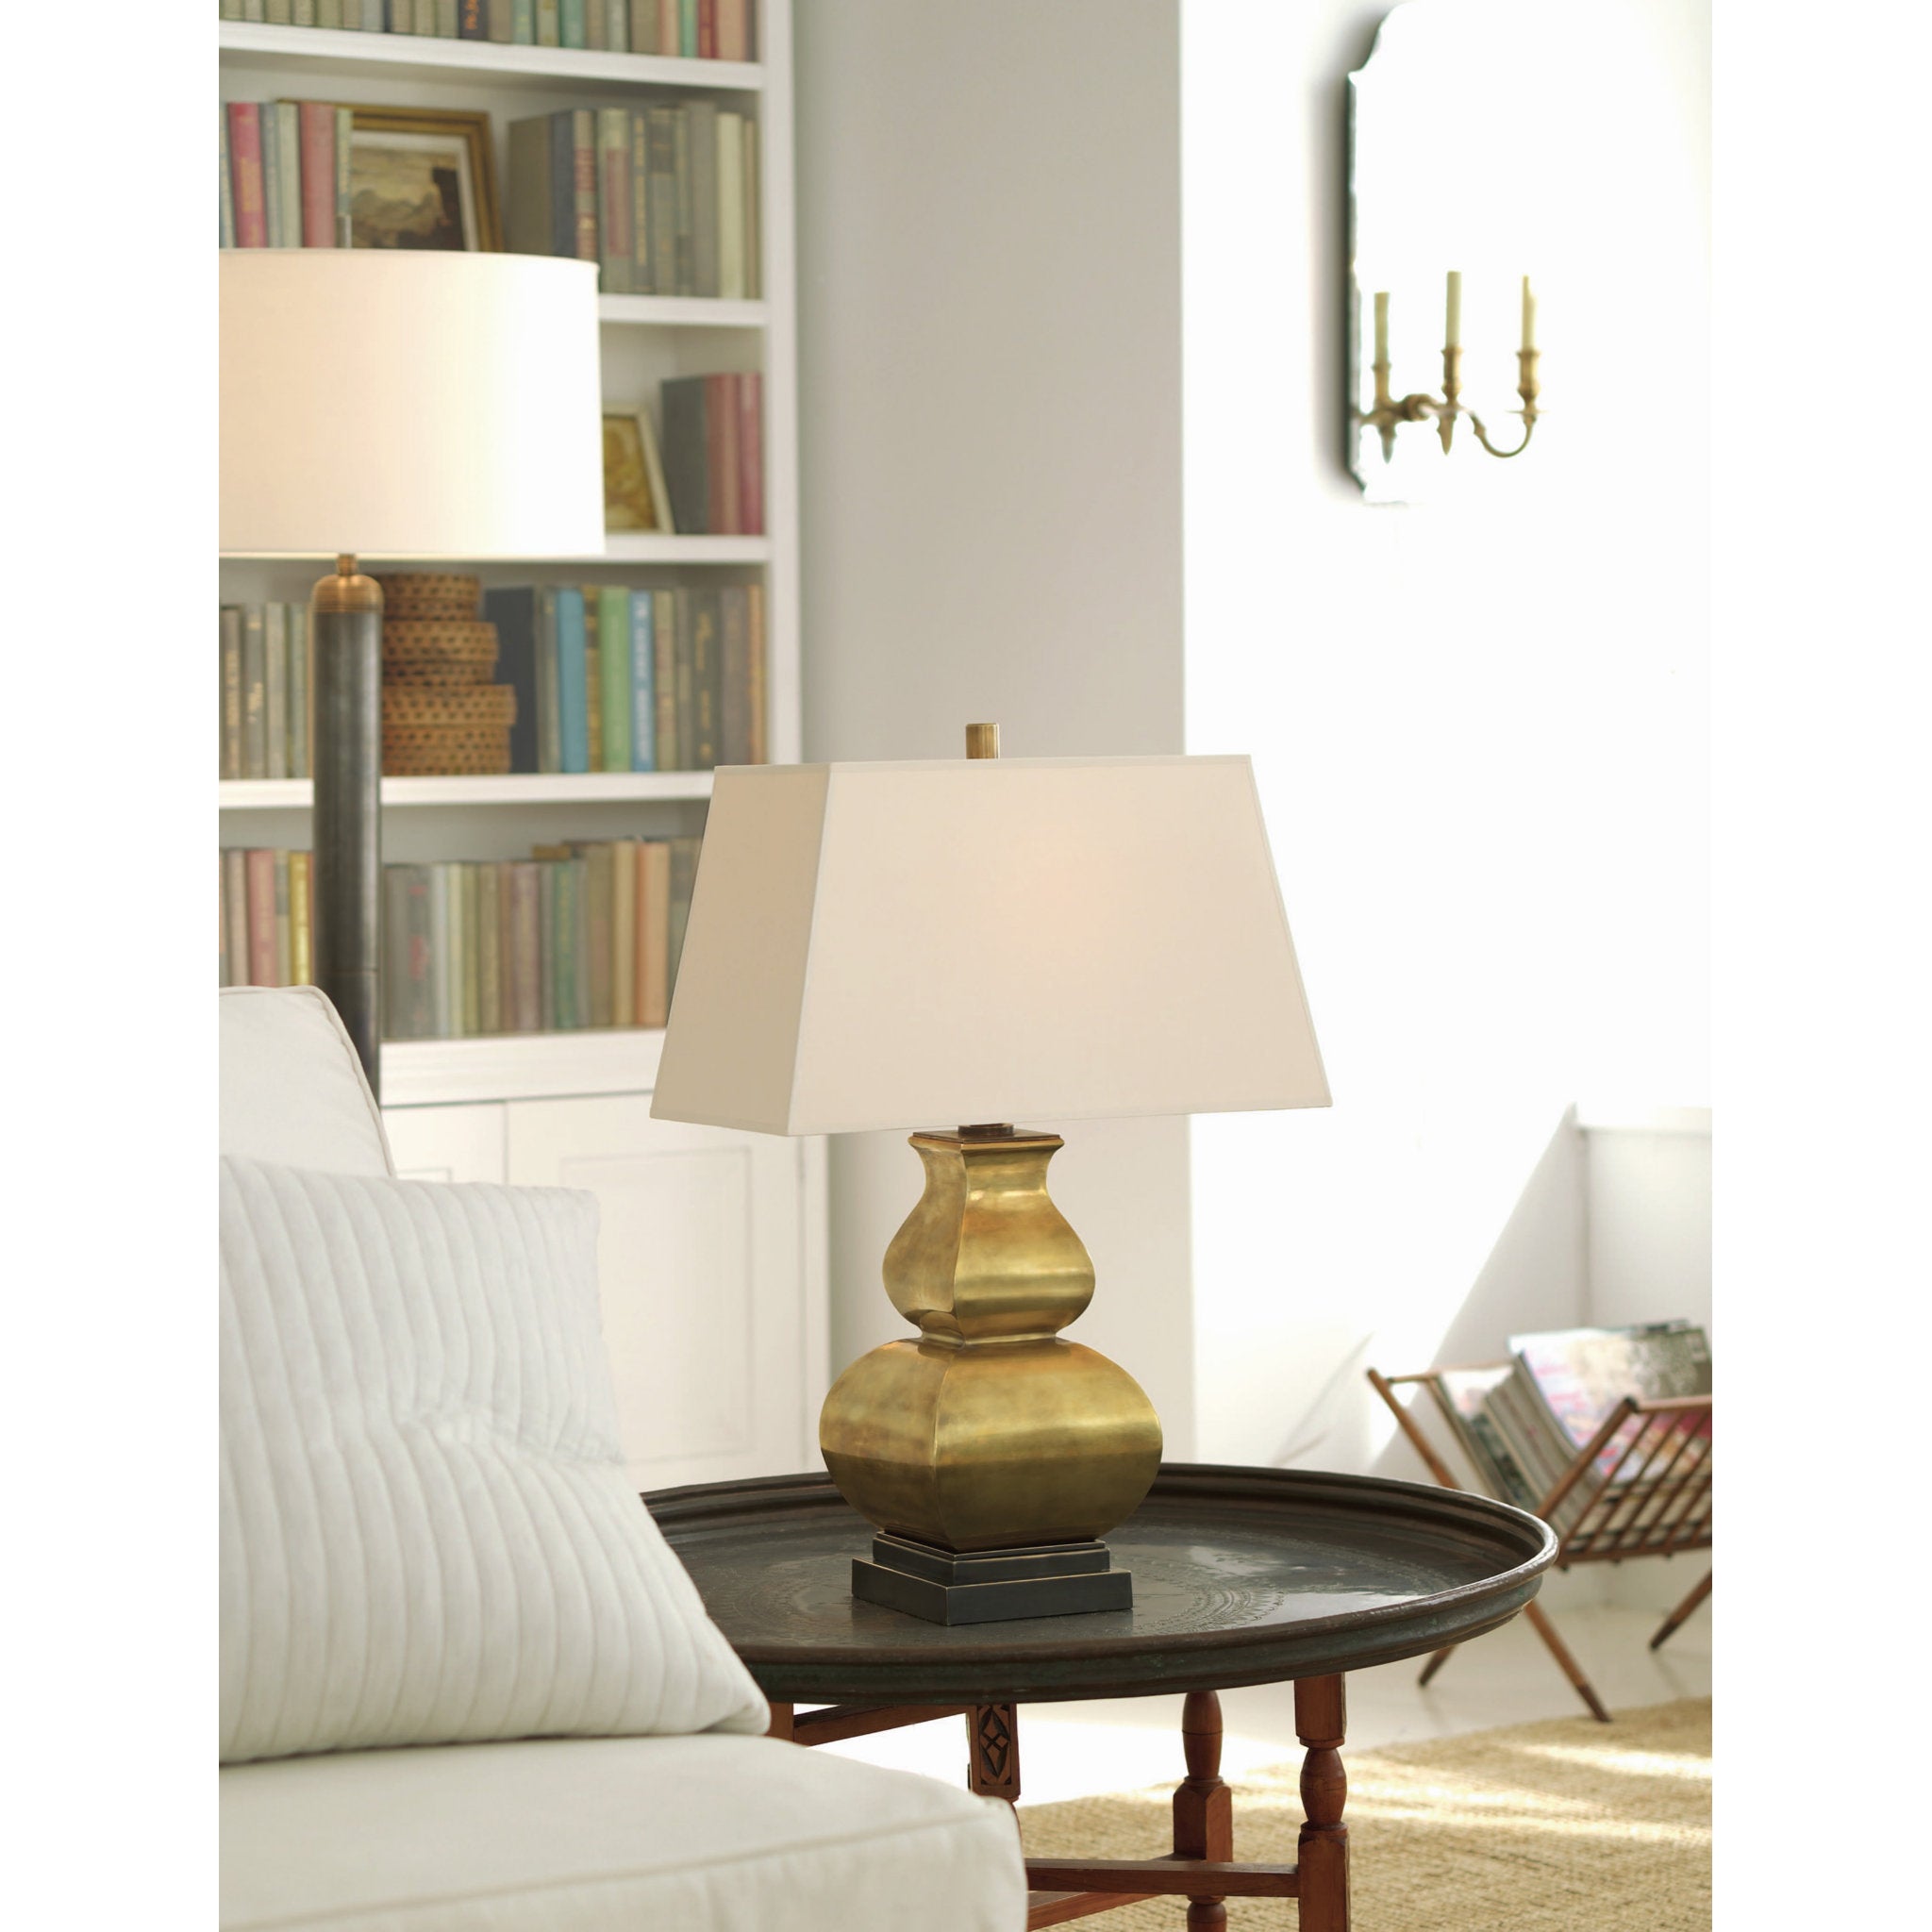 E.F. Chapman for Visual Comfort Antiqued Brass Urn Table Lamp